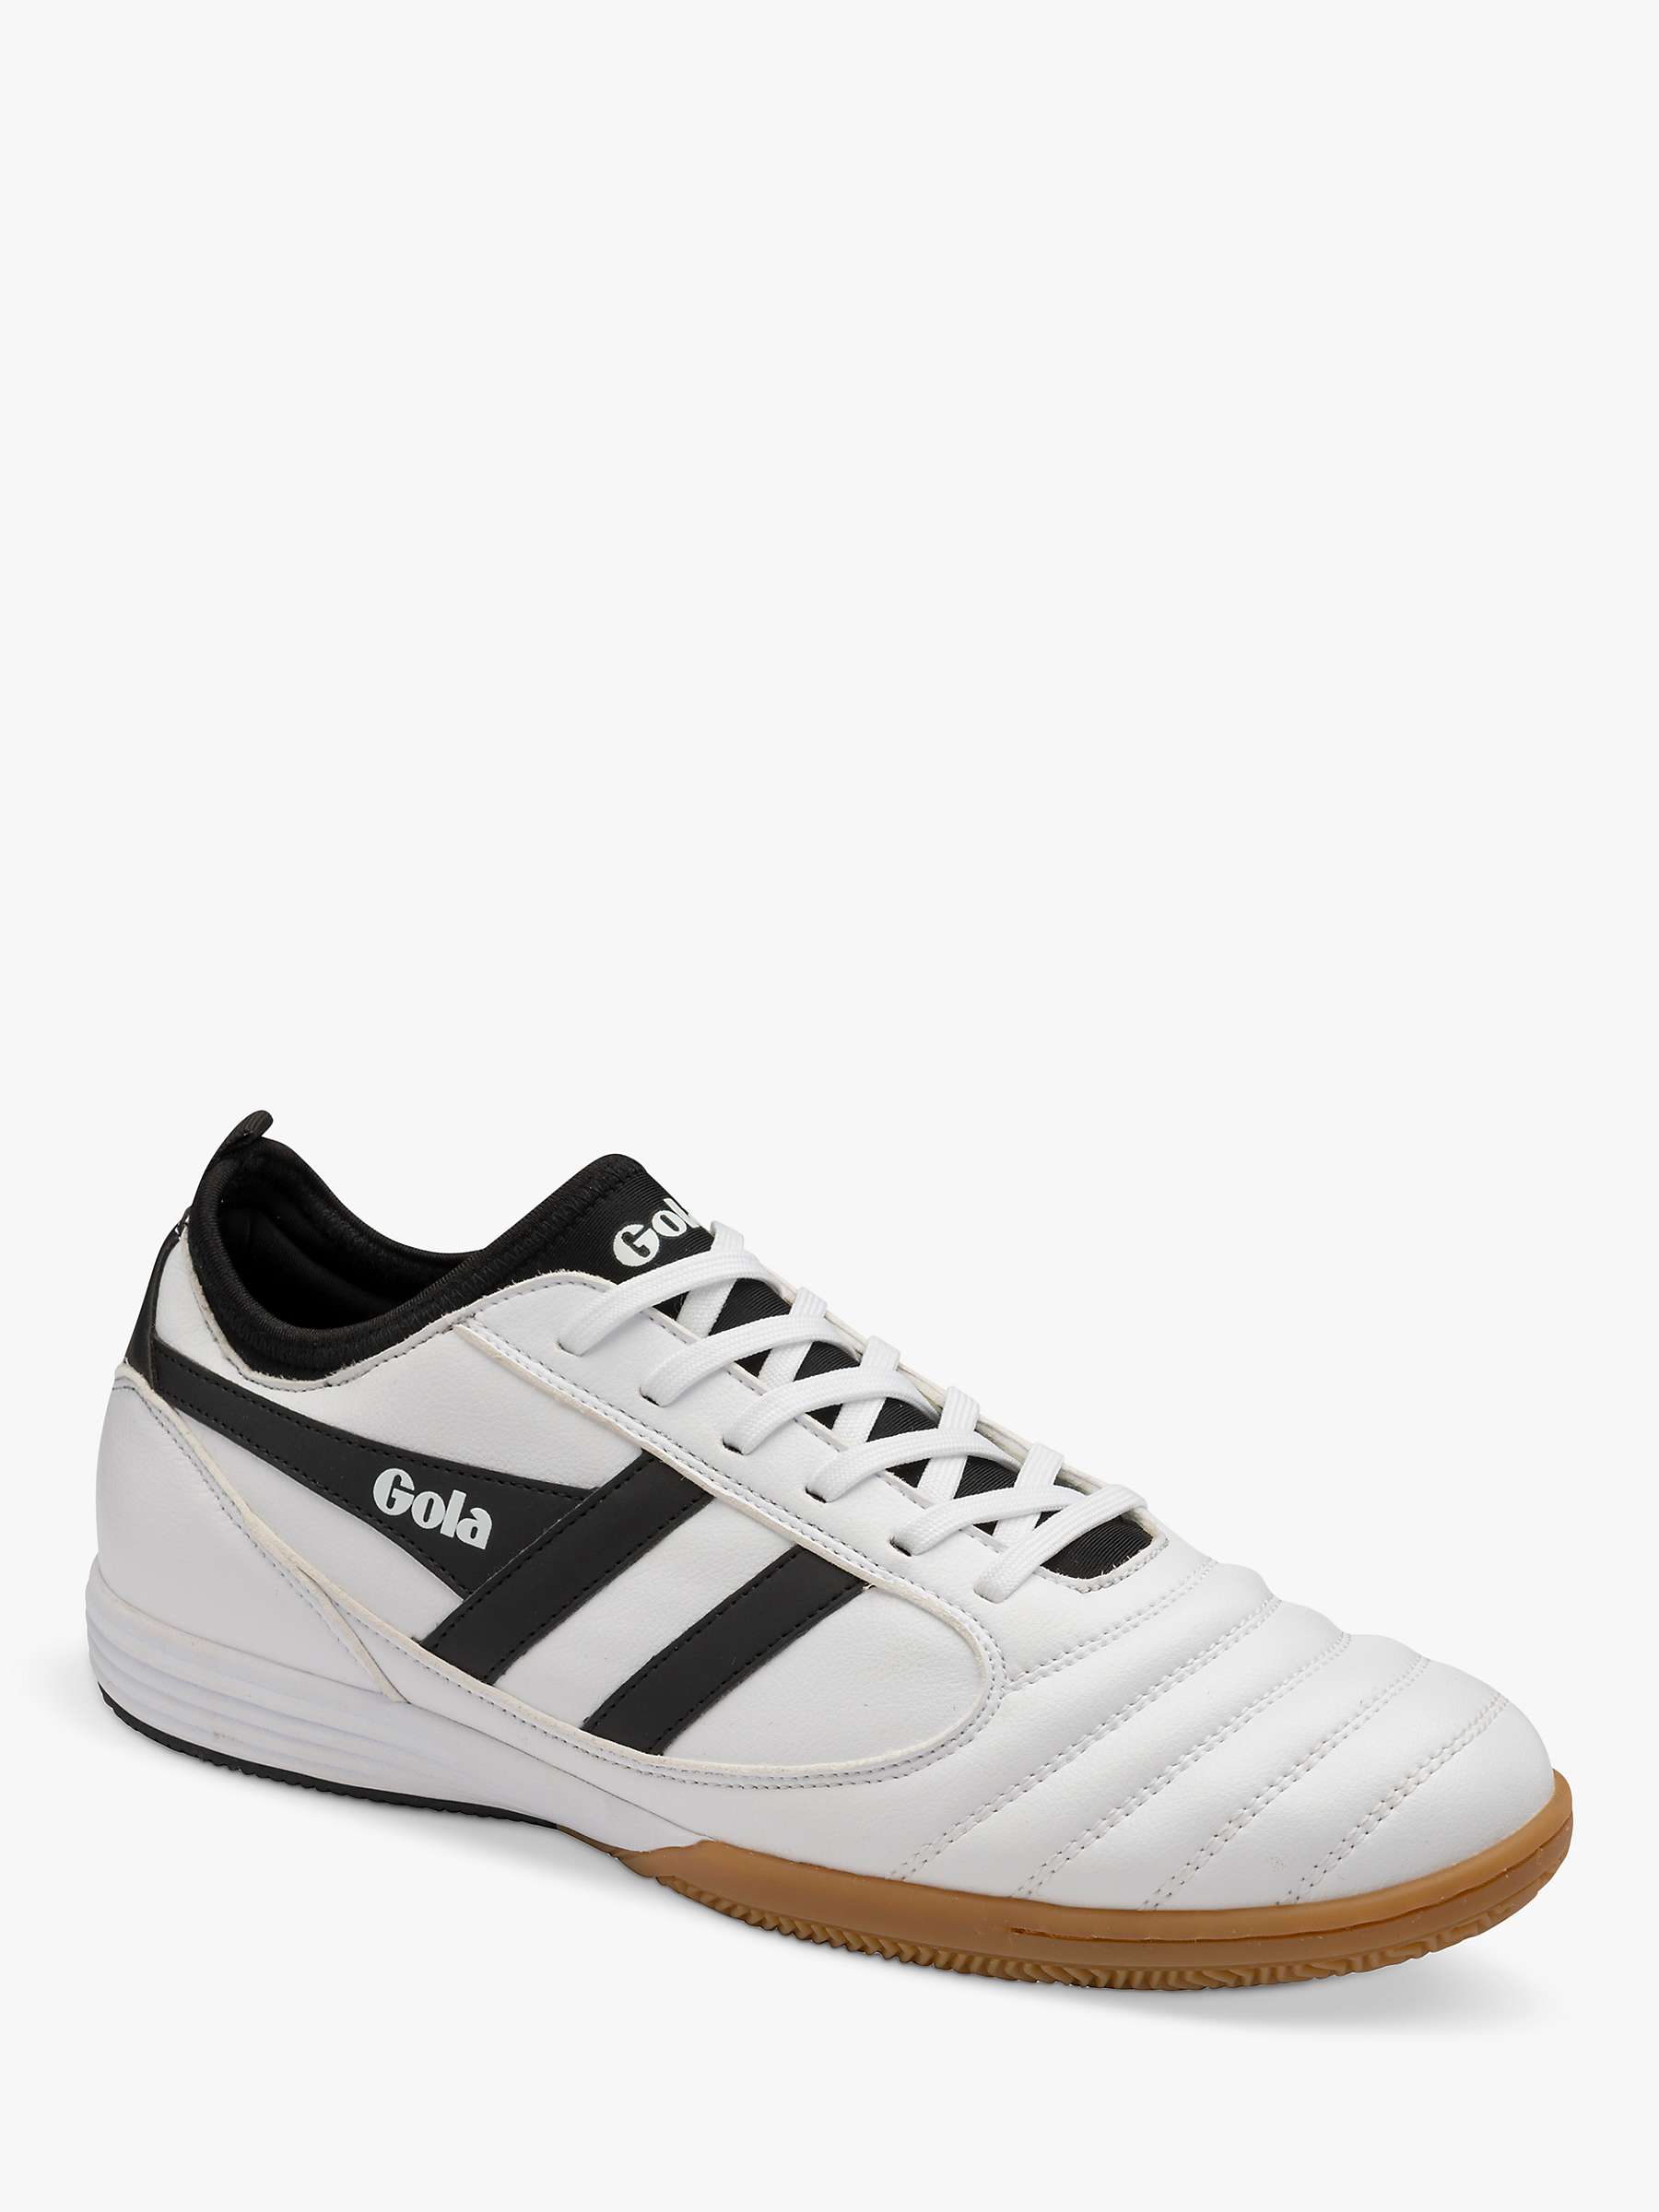 Buy Gola Kids' Performance Ceptor TX Football Trainers Online at johnlewis.com